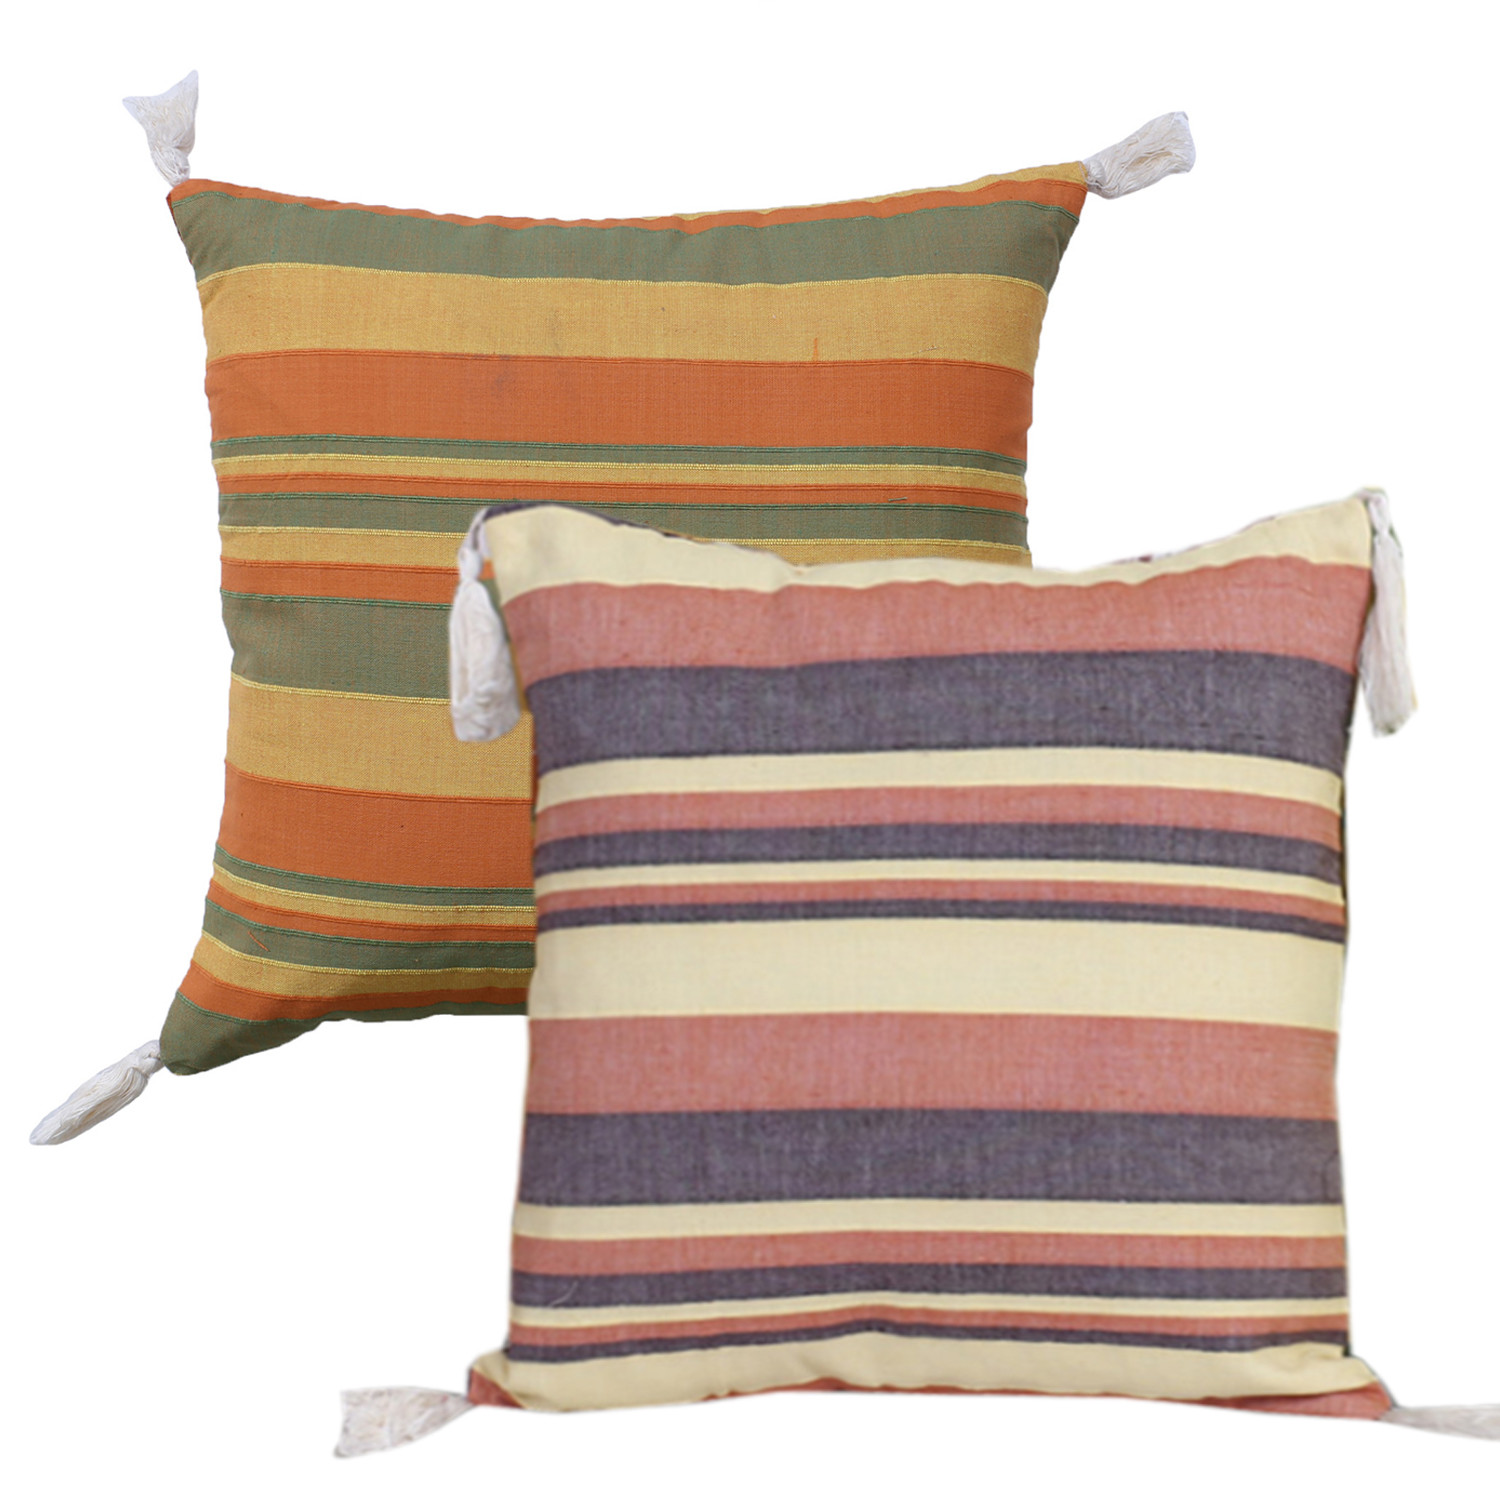 Kuber Industries Cushion Cover With Corner Tassel|Ractangle Cushion Covers|Sofa Cushion Covers|Cushion Covers 16 inch x 16 inch|Cushion Cover Set of 5 (Multicolor)